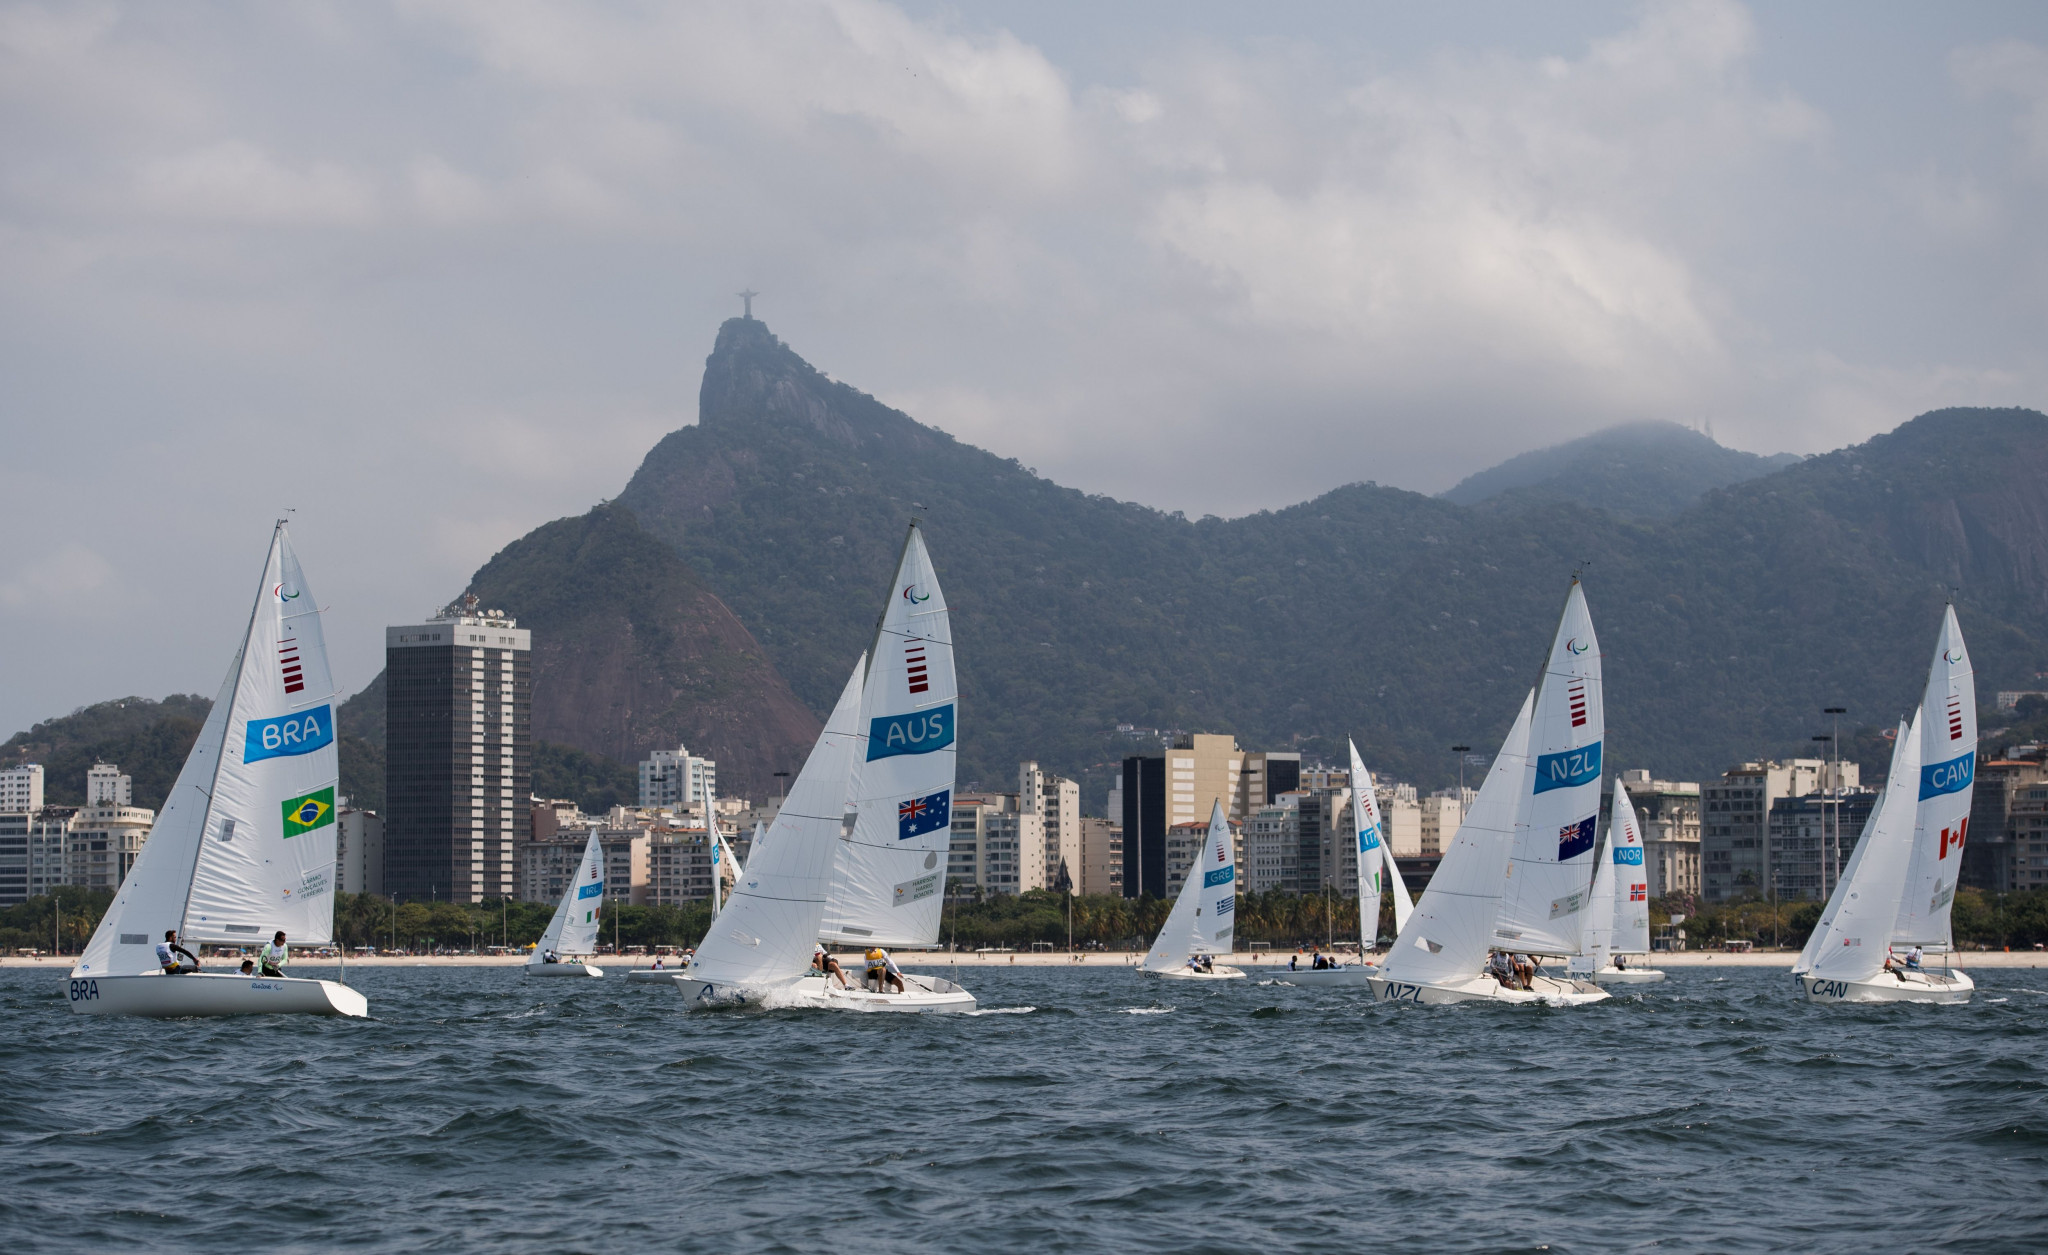 Sailing had been a full medal sport at the Paralympics since 2000 but was dropped from the programme after Rio 2016 ©Getty Images